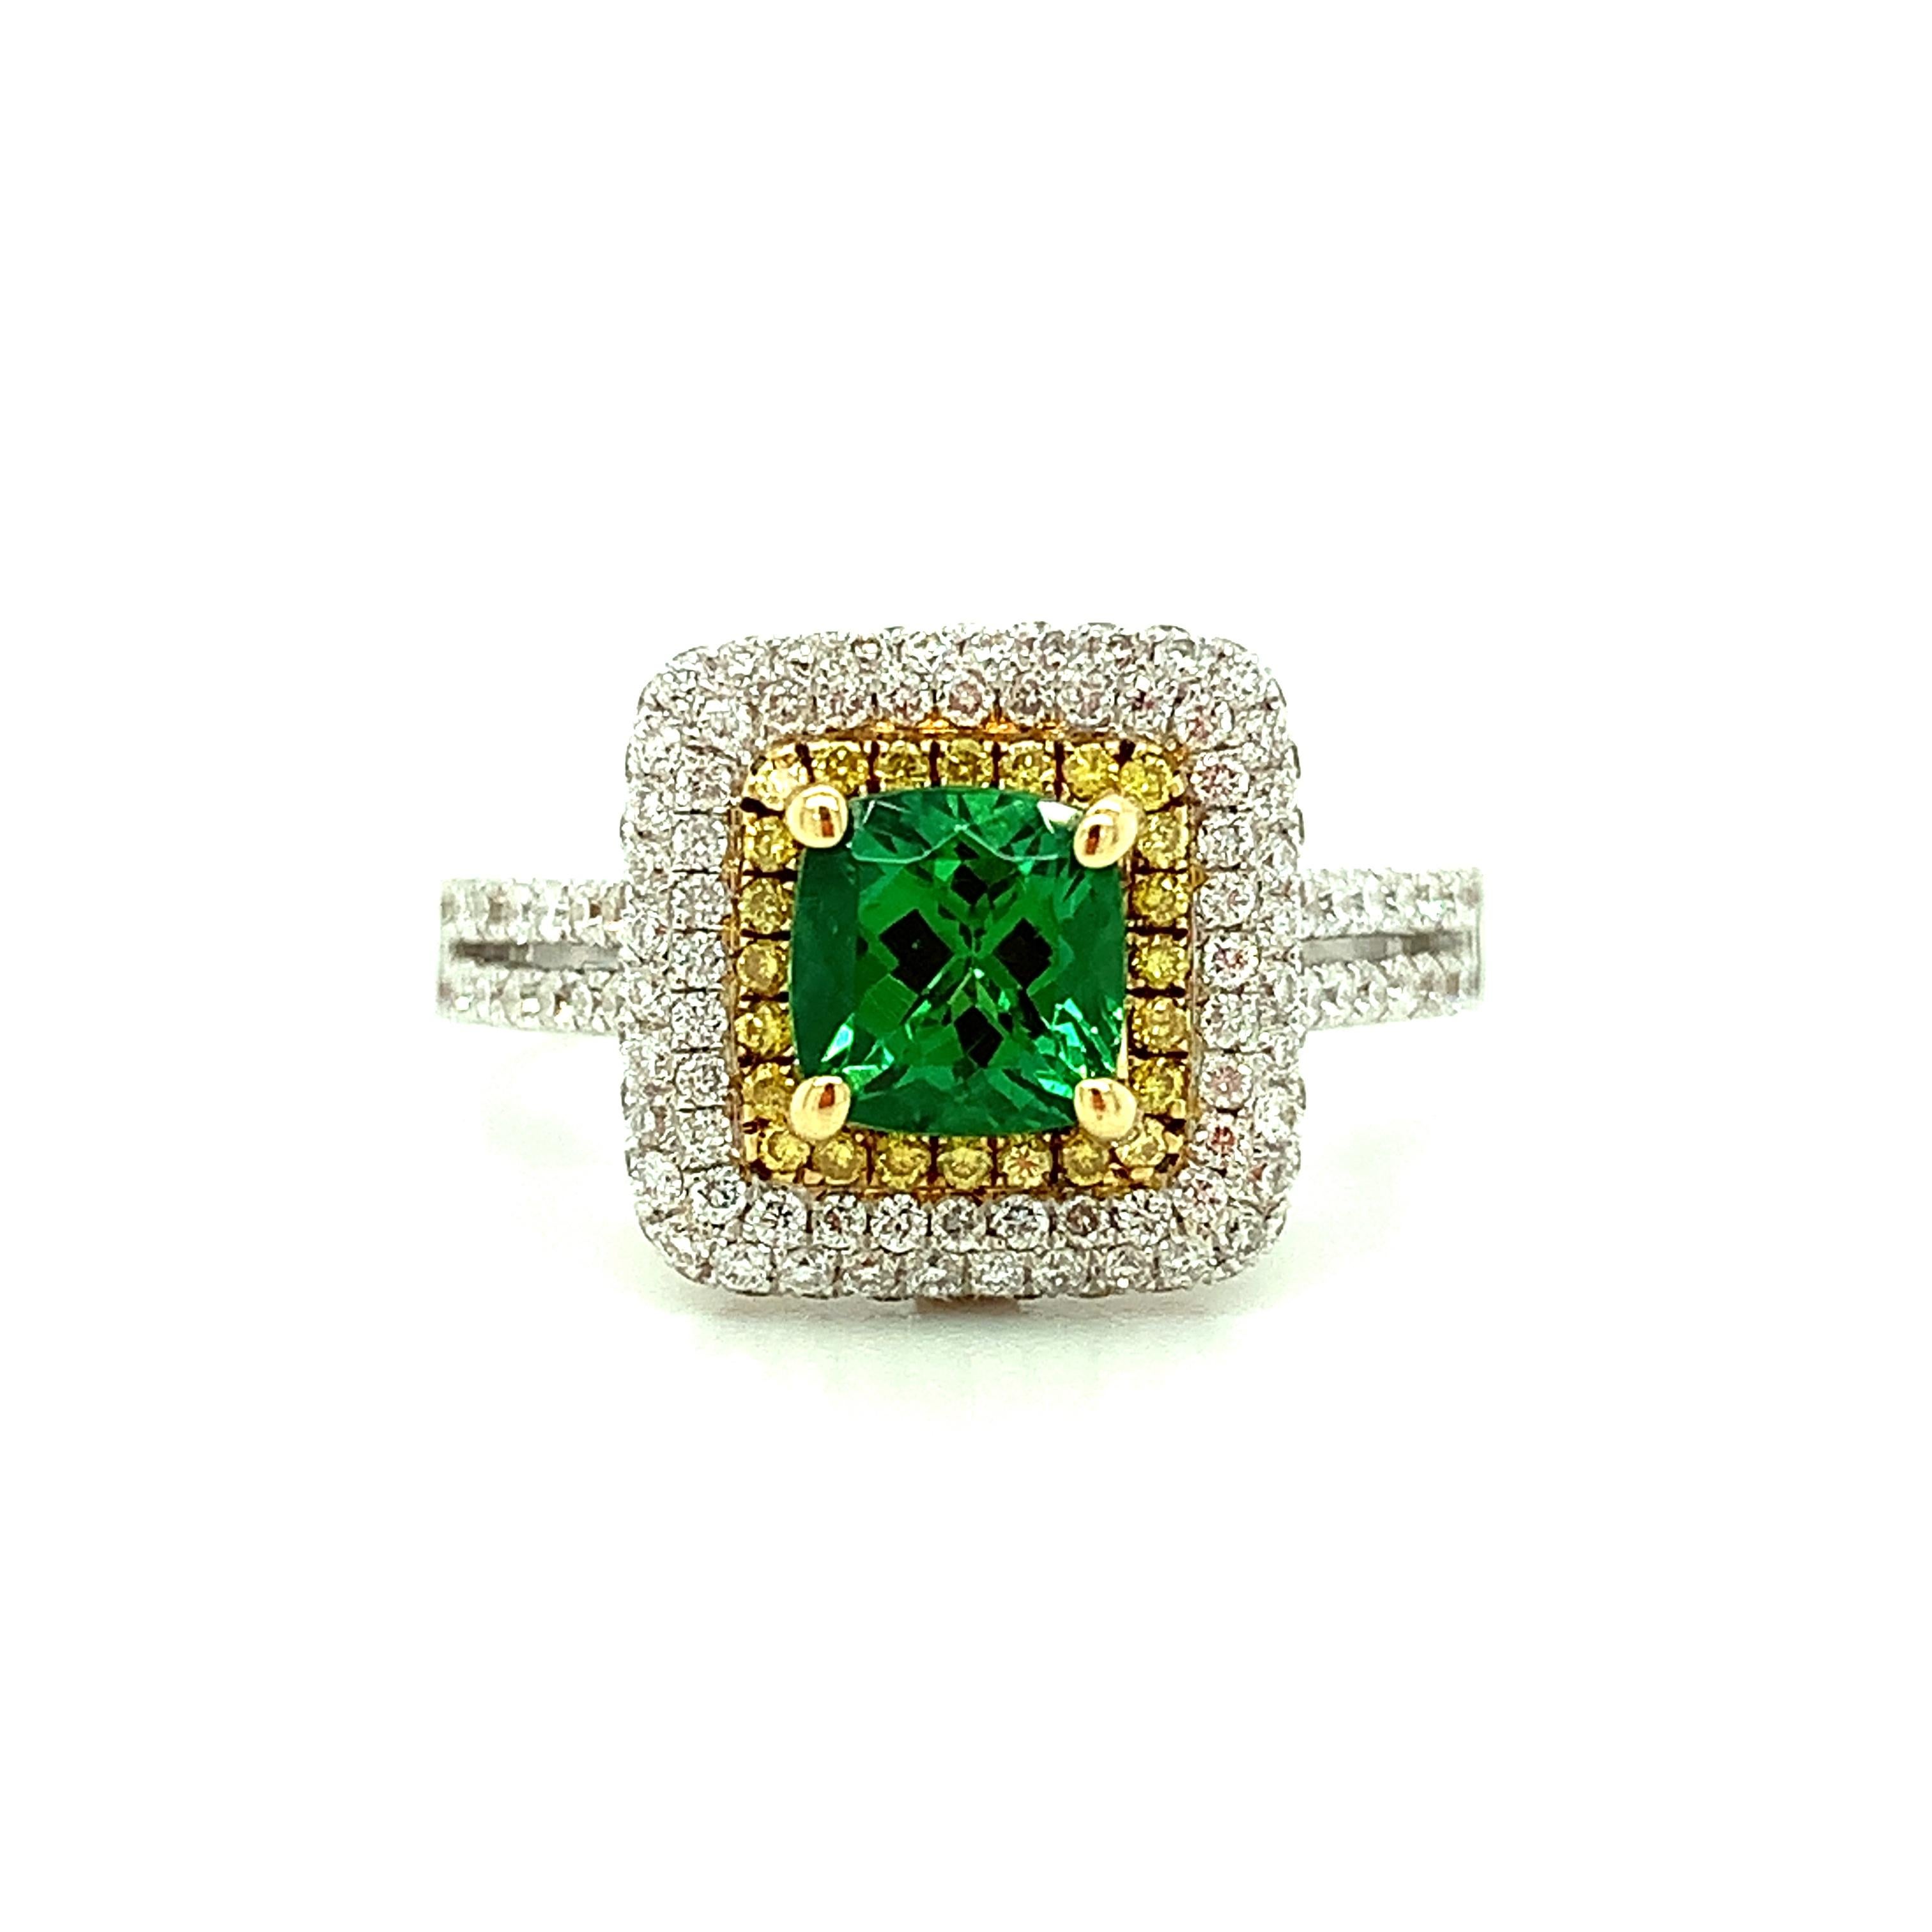 A vibrant, rich green Tsavorite garnet is featured in this gorgeous 18k white gold cocktail ring. The cushion-shaped African tsavorite weighs 1.20 carat and has exceptional color and brilliance. It is surrounded by a halo of bright yellow canary